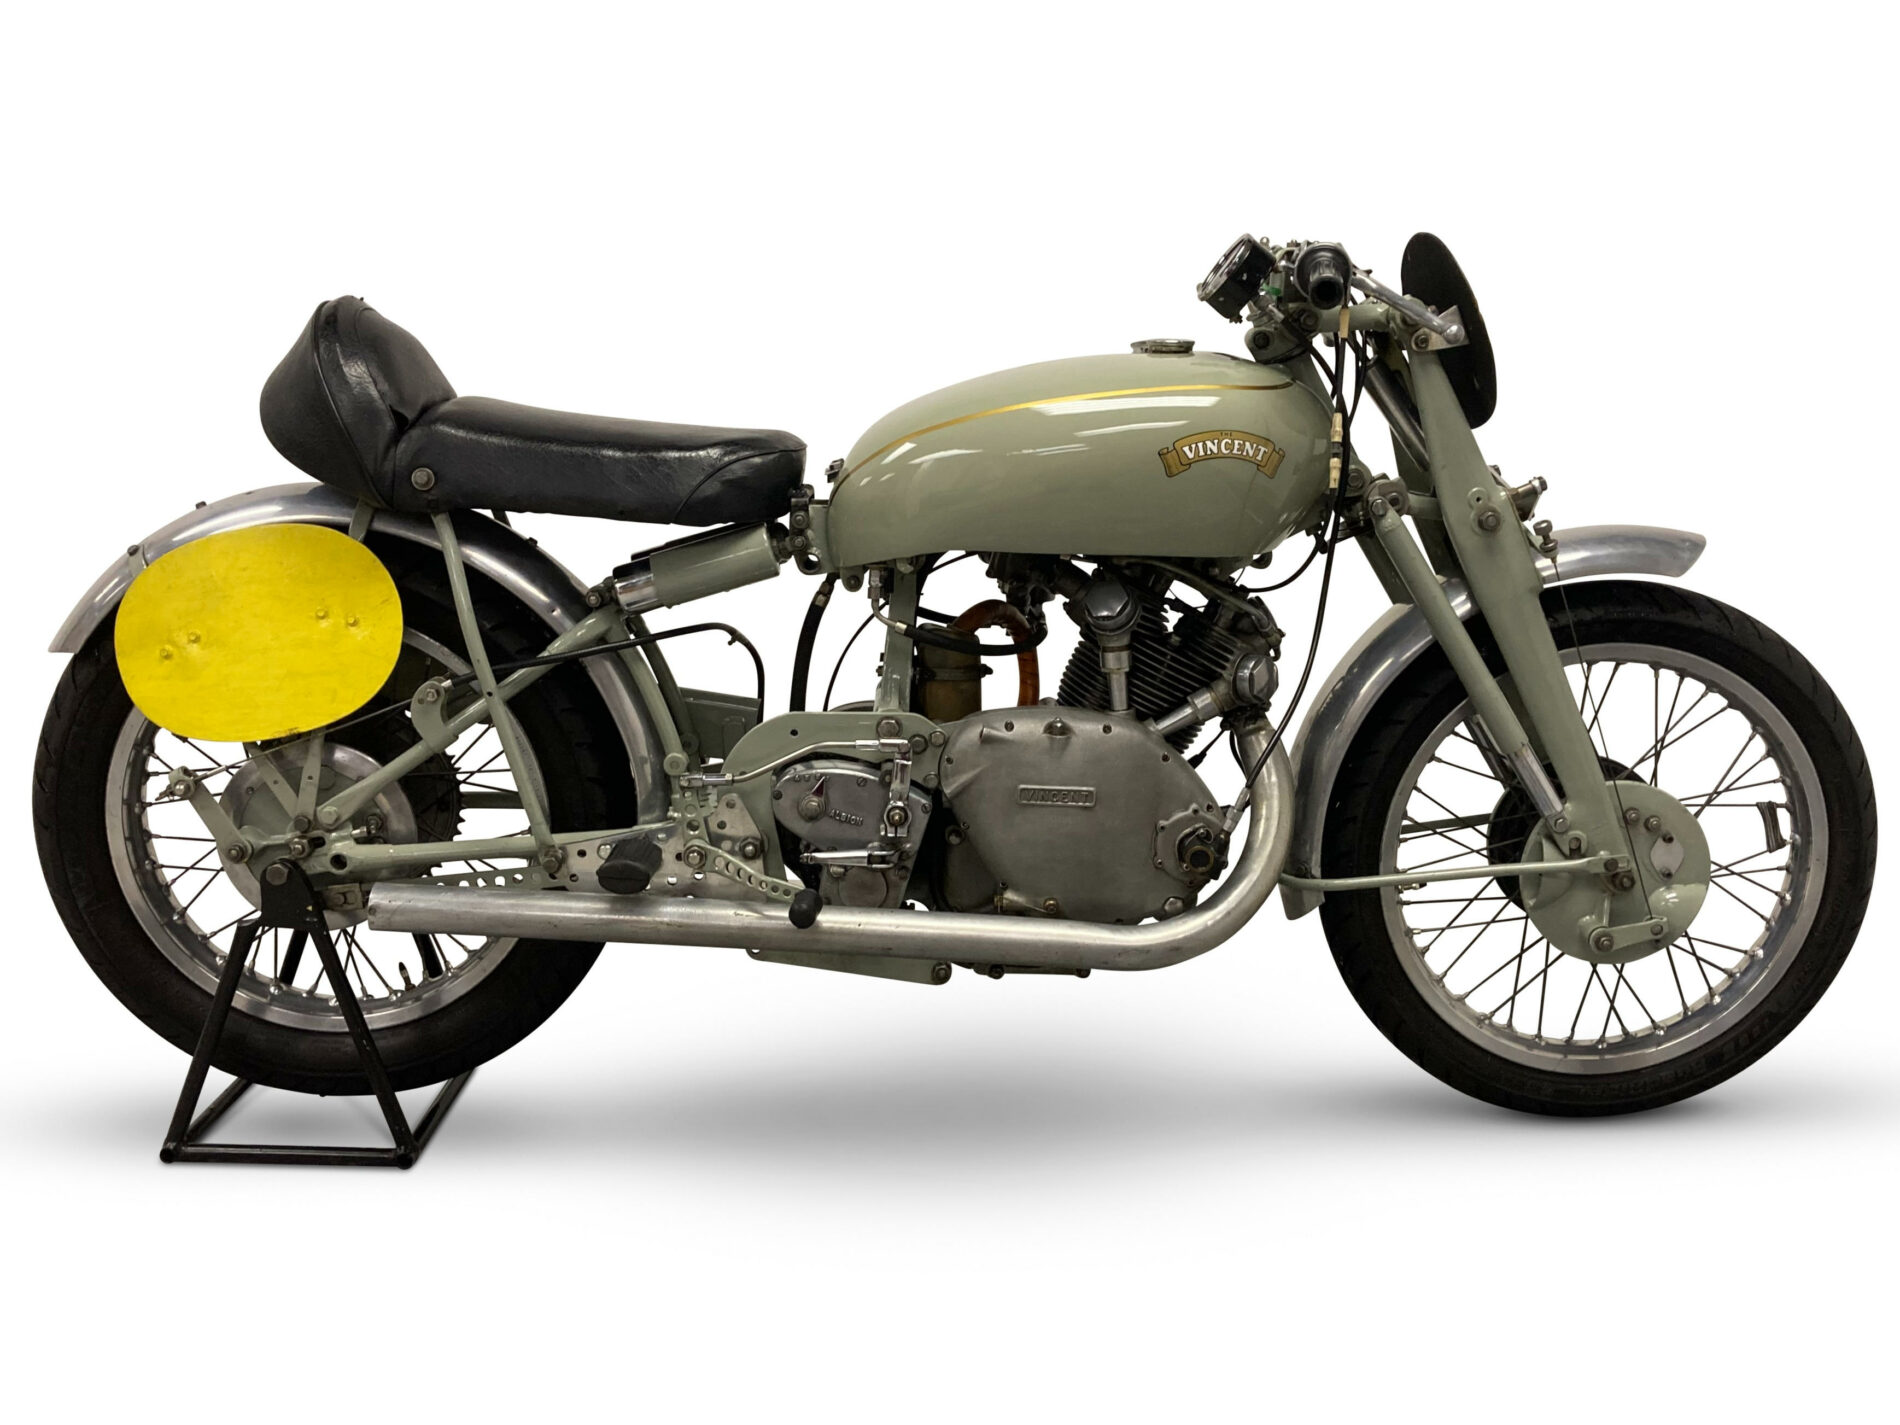 Vincent Grey Flash classic racing motorcycle